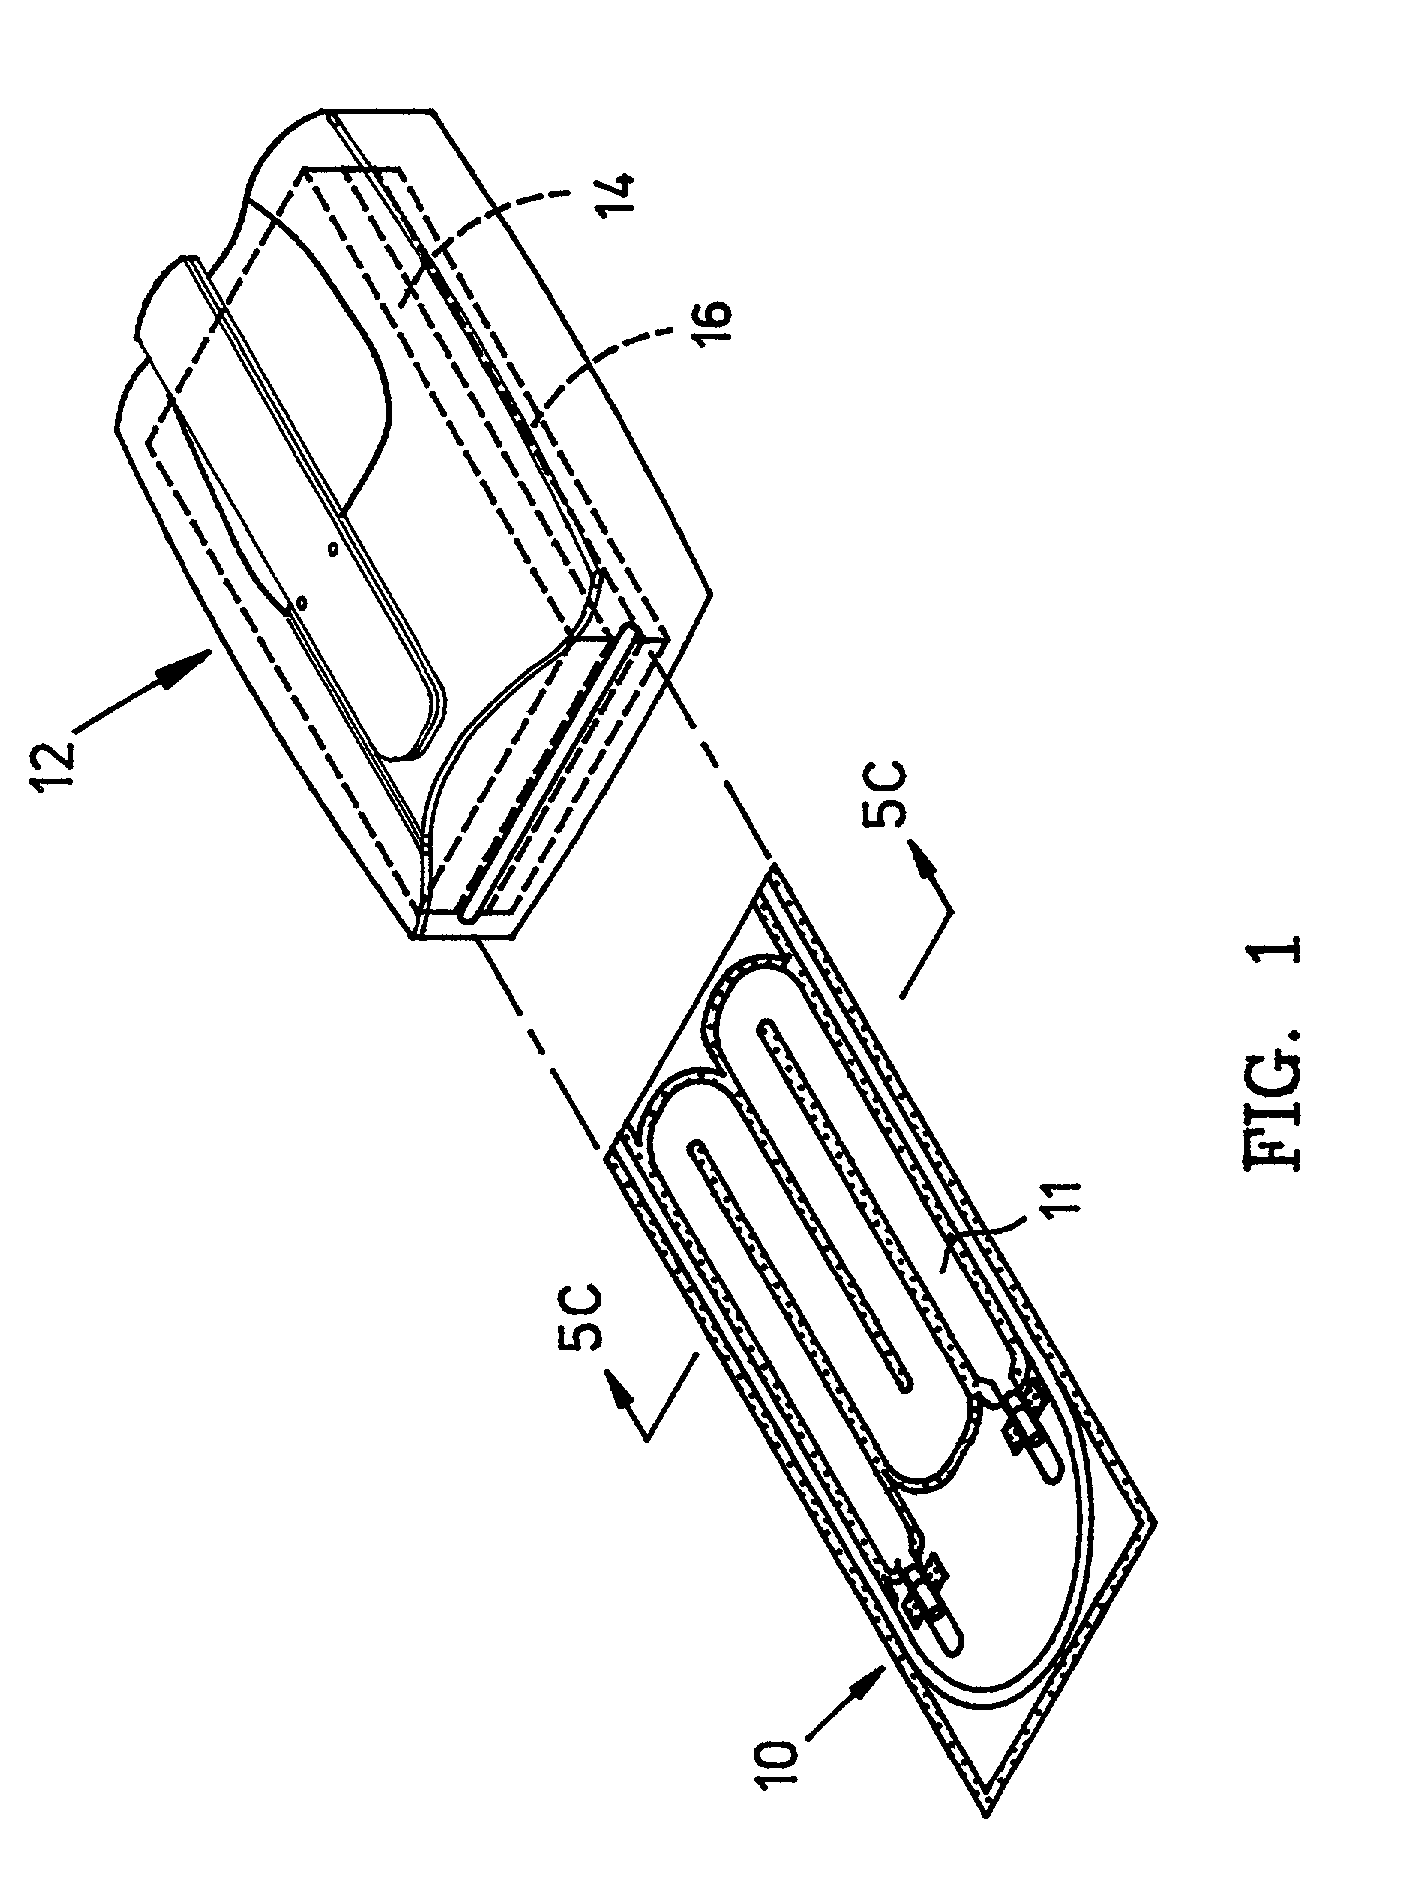 Fluid warming cassette with a tensioning rod